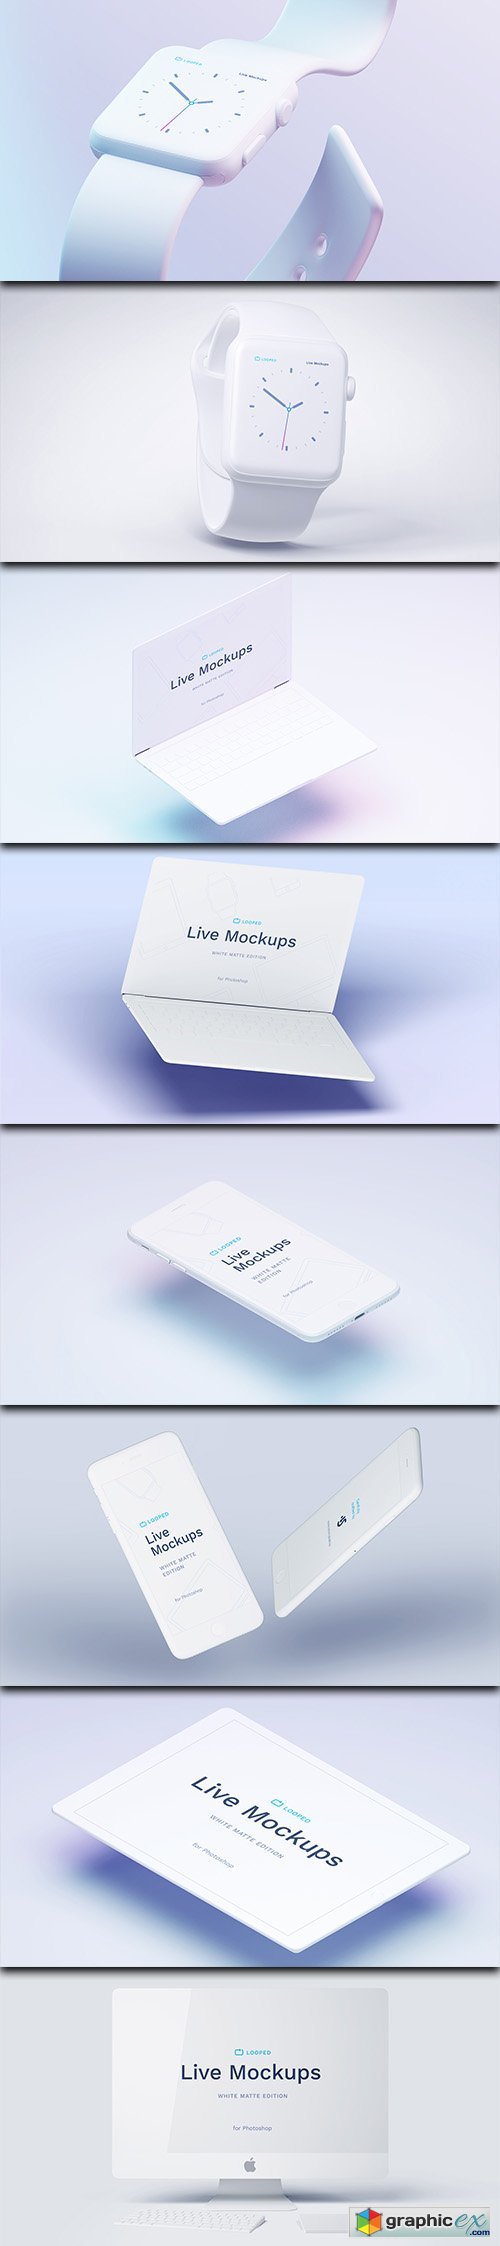 PSD & SKETCH Mock-Up's - Apple Technology - White Clay